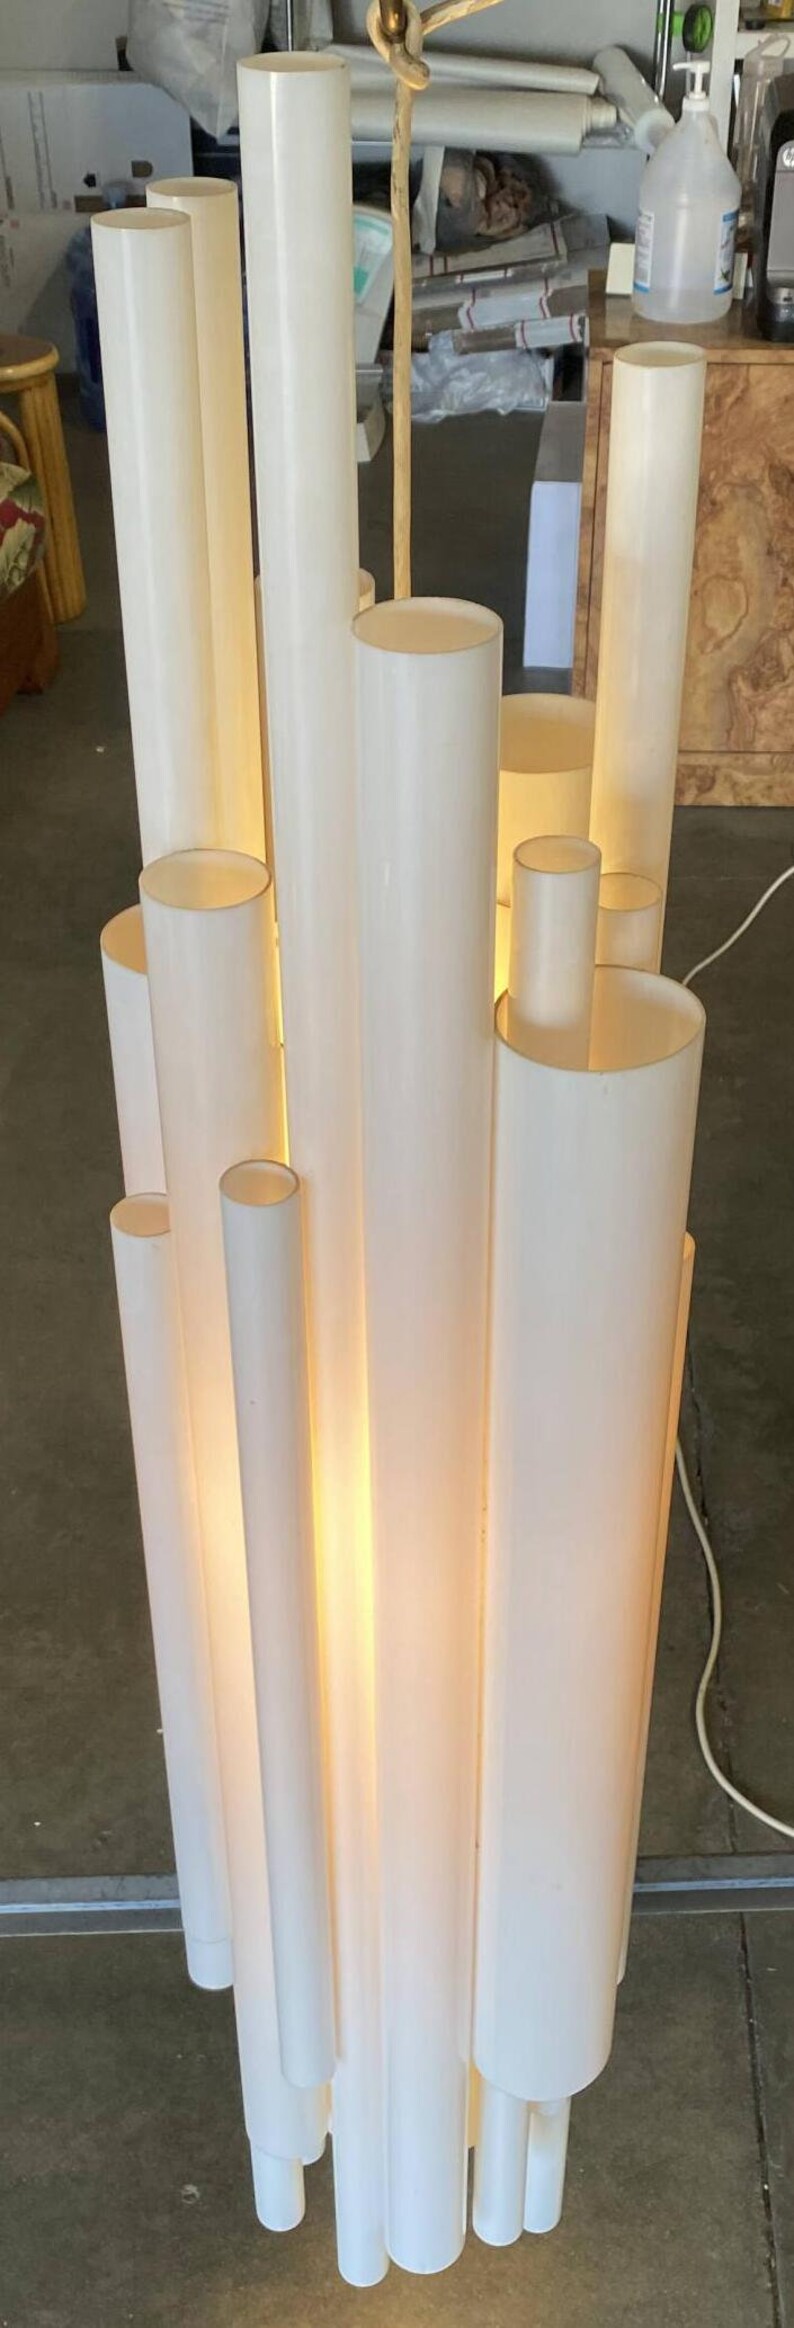 Modernist White Lucite Stacked Tube Chandelier by Rougier, Circa 1970s image 4